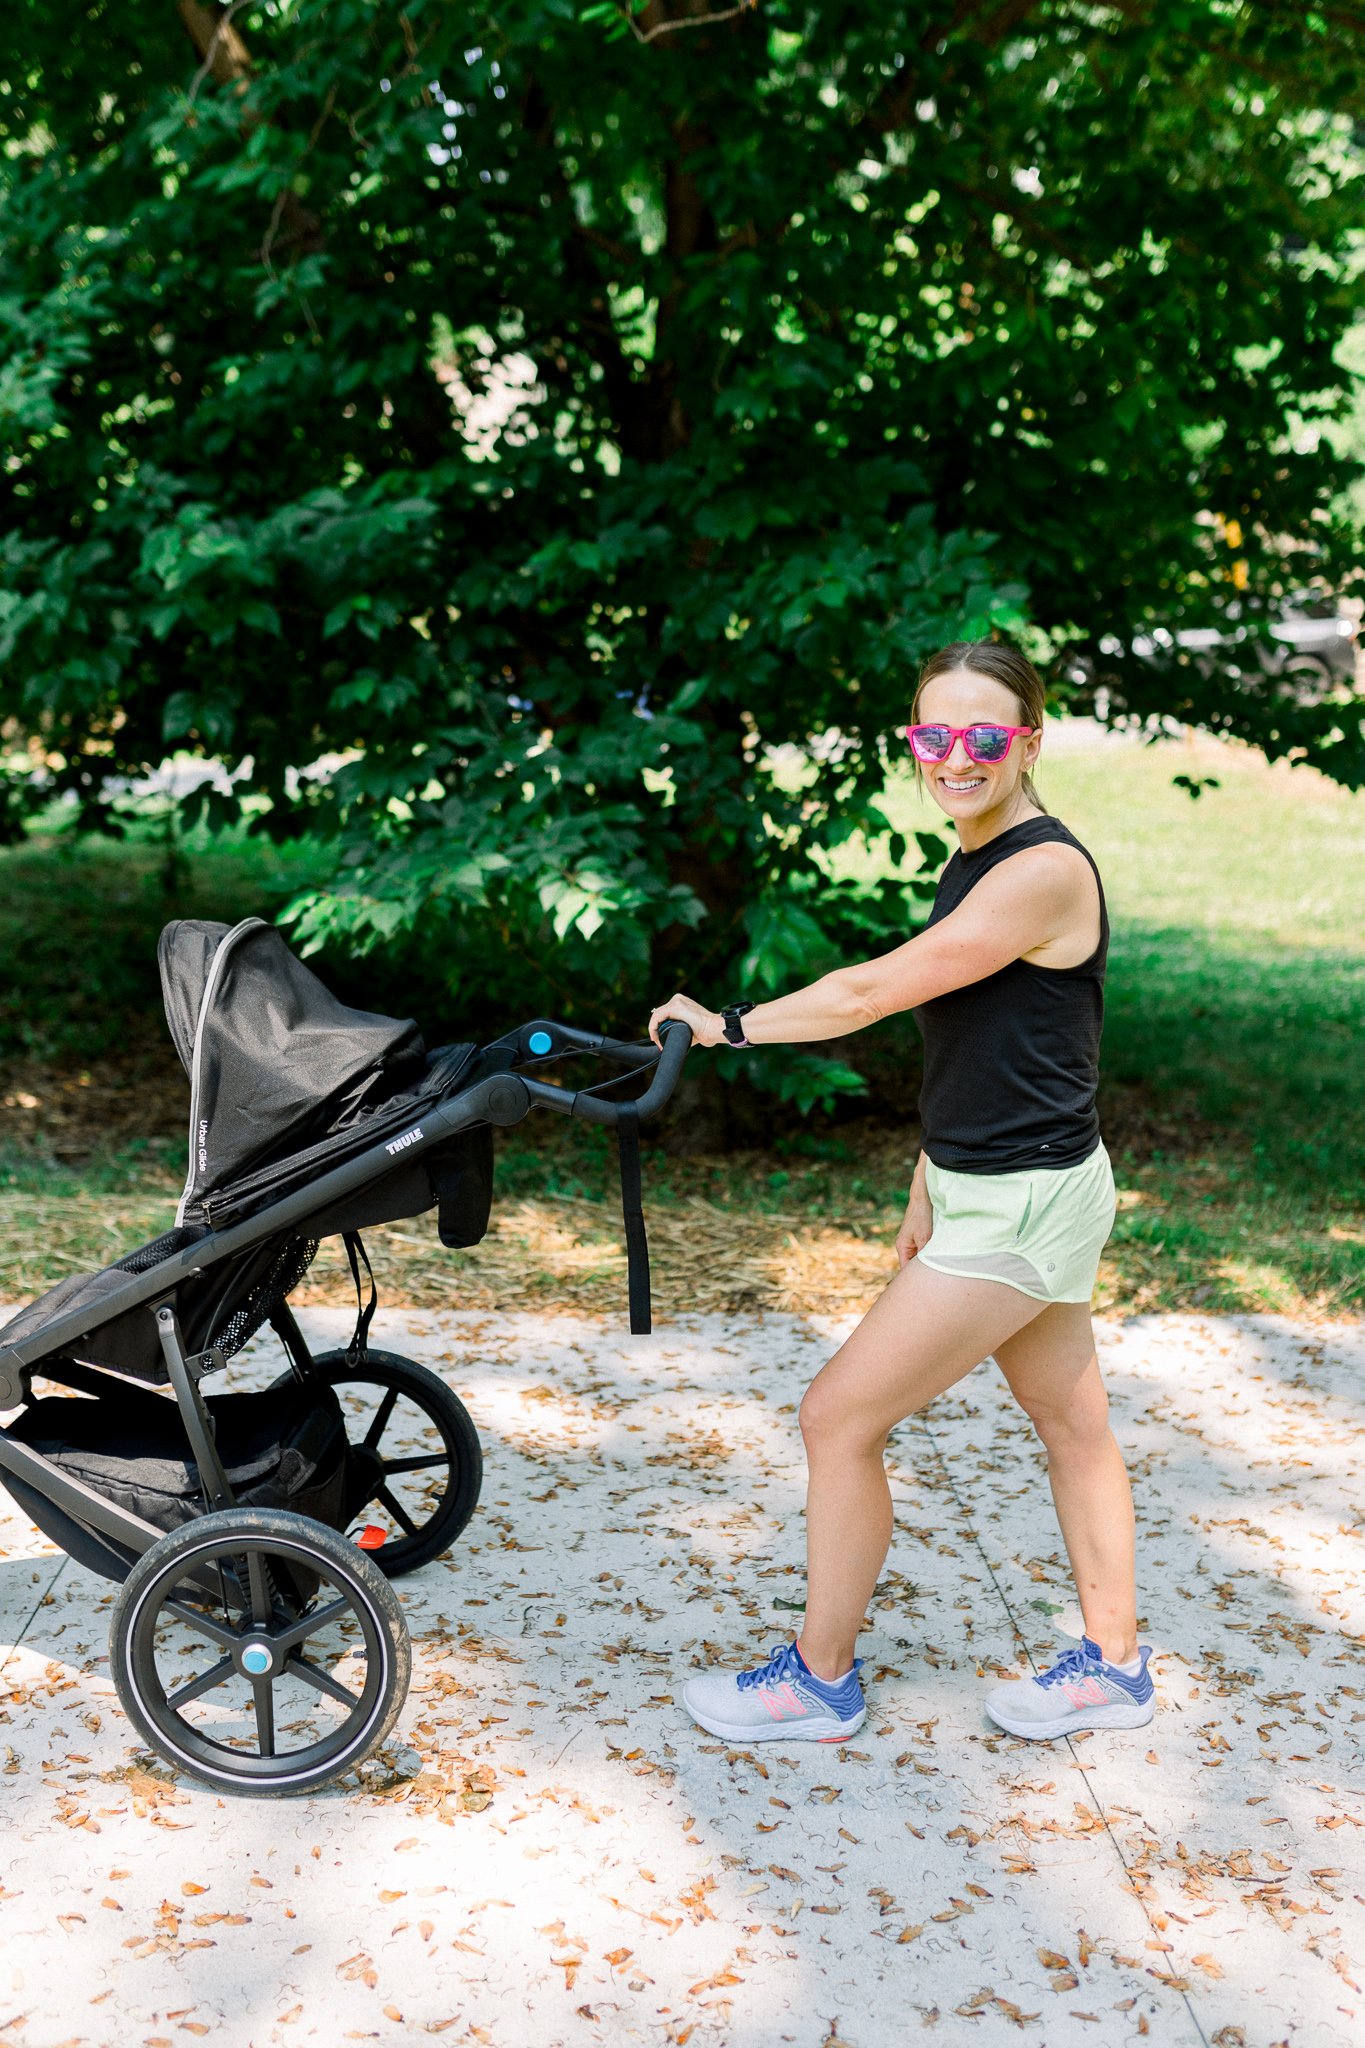 How to run with baby in stroller